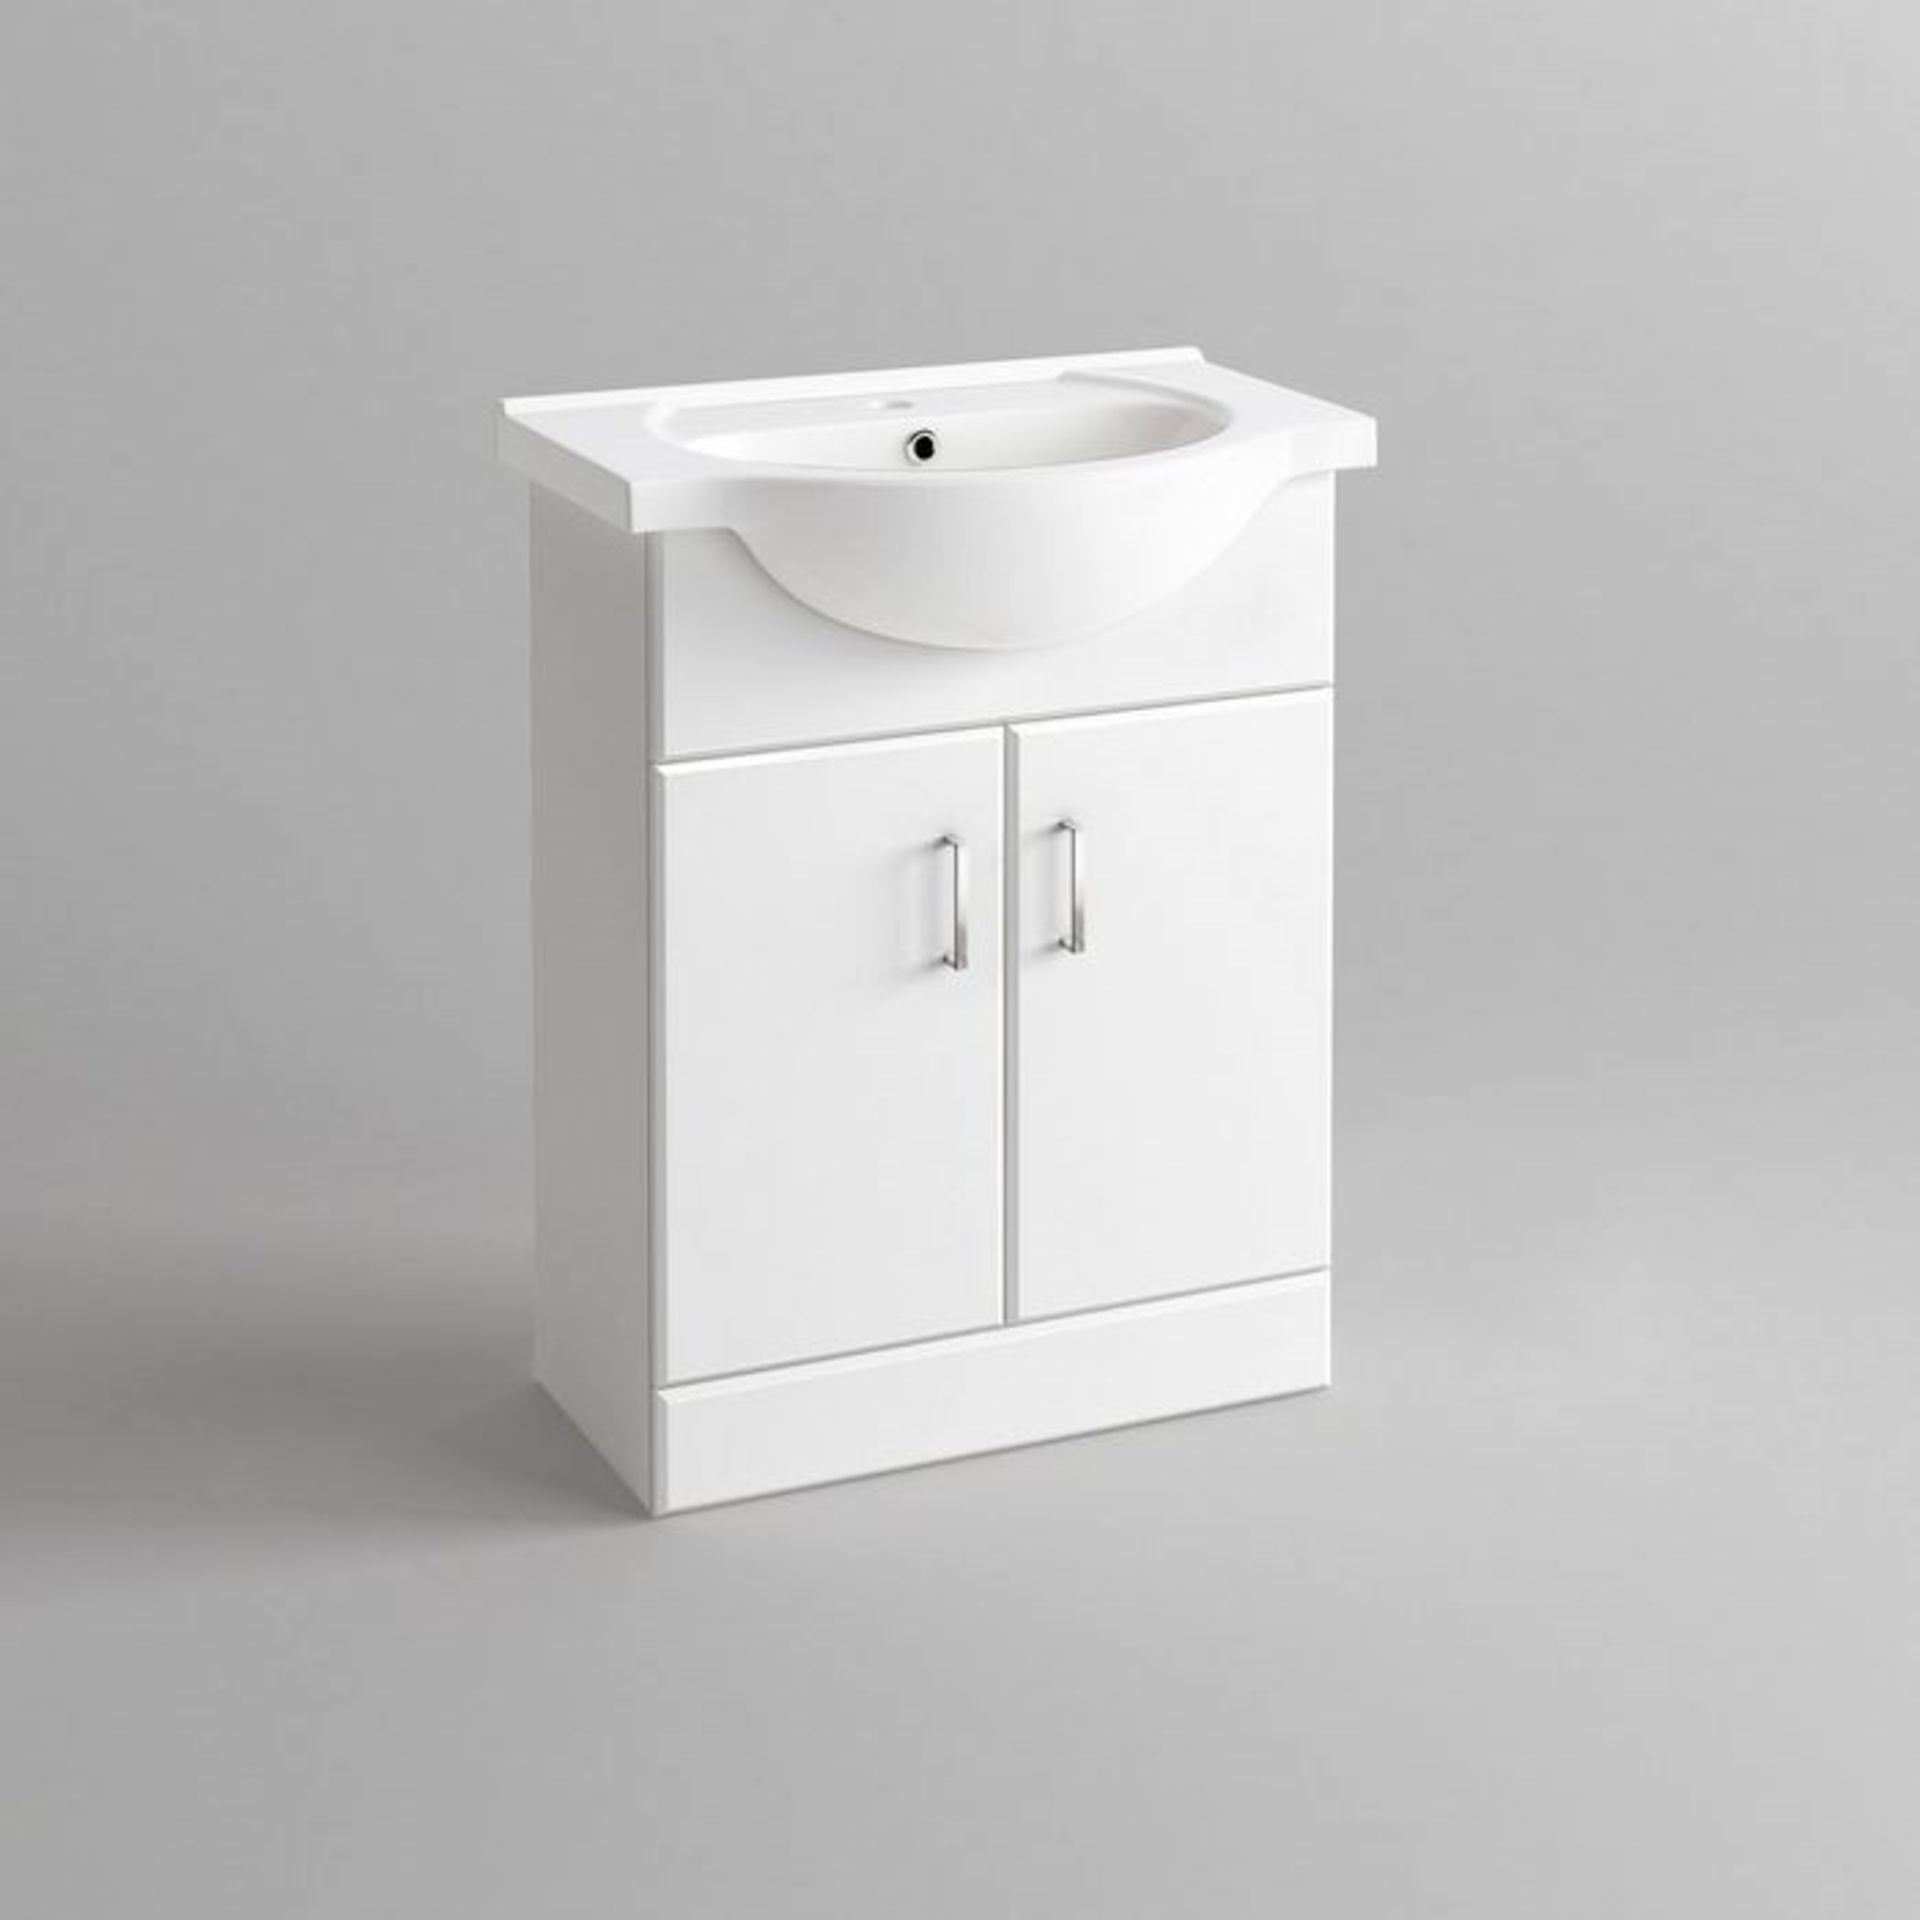 (TT150) 550mm Quartz Gloss White Built In Basin Cabinet. RRP £349.99. Comes complete with basi... - Image 3 of 4